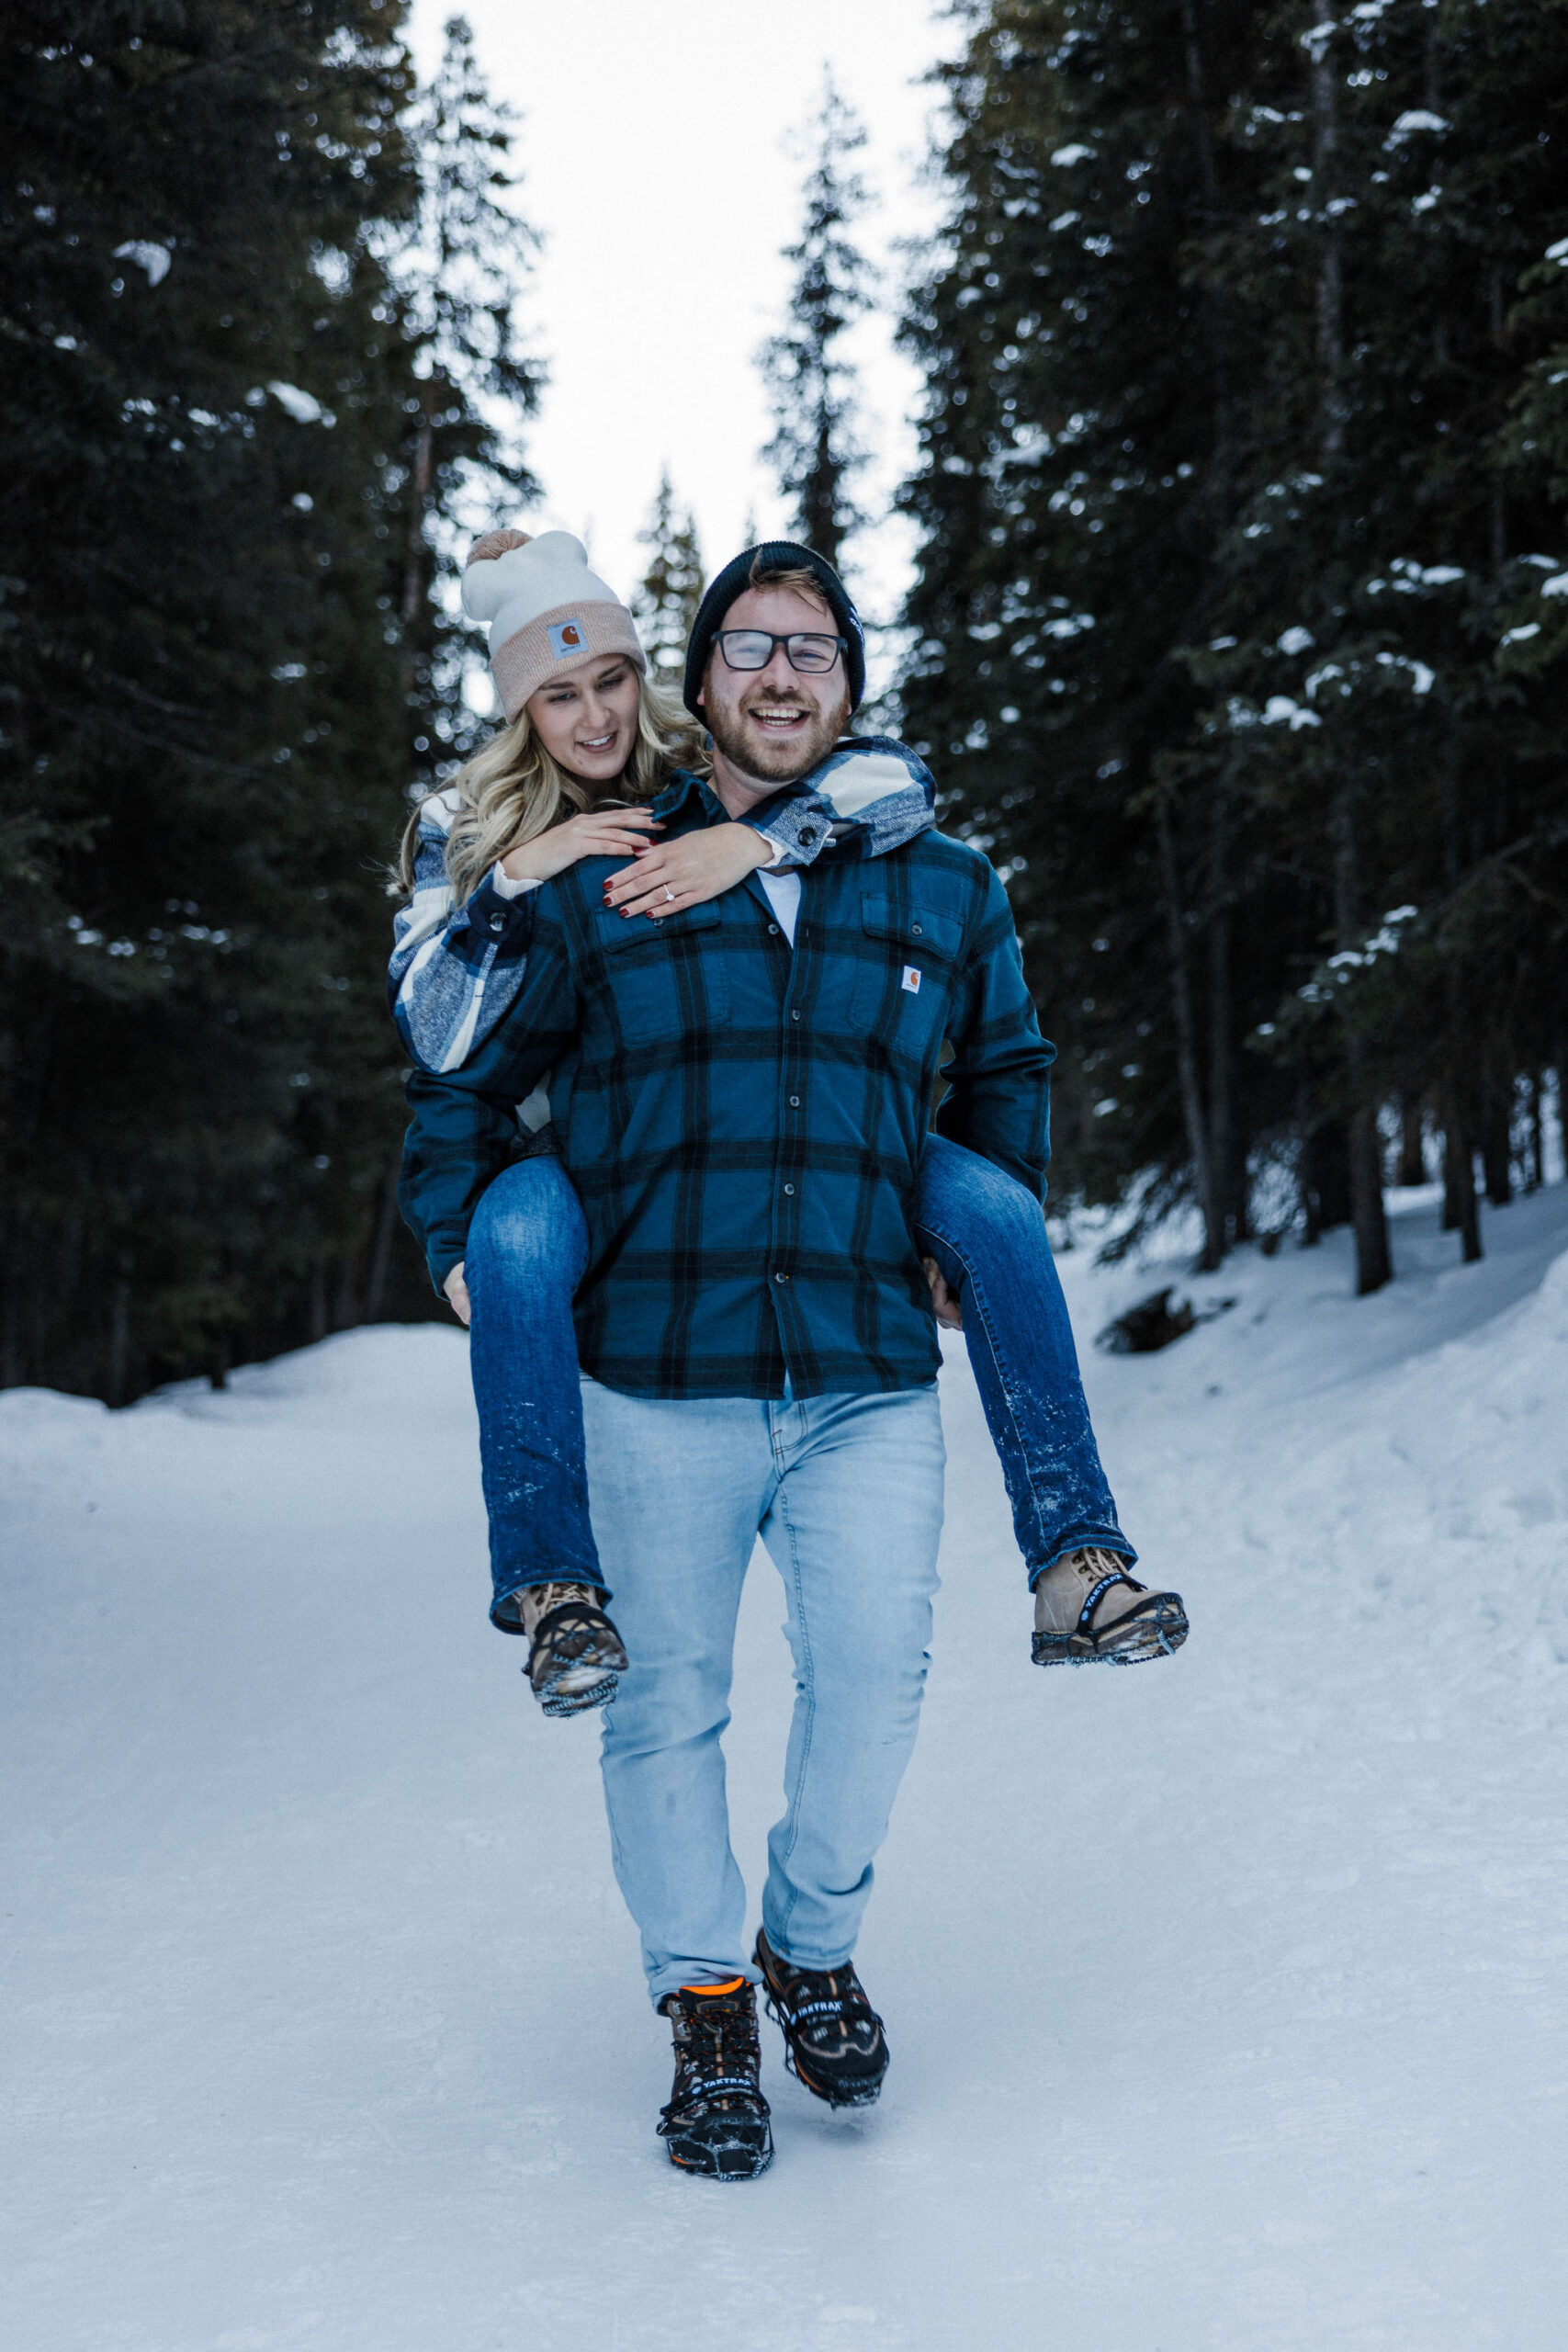 man carries woman on his back during winter engagement photos.